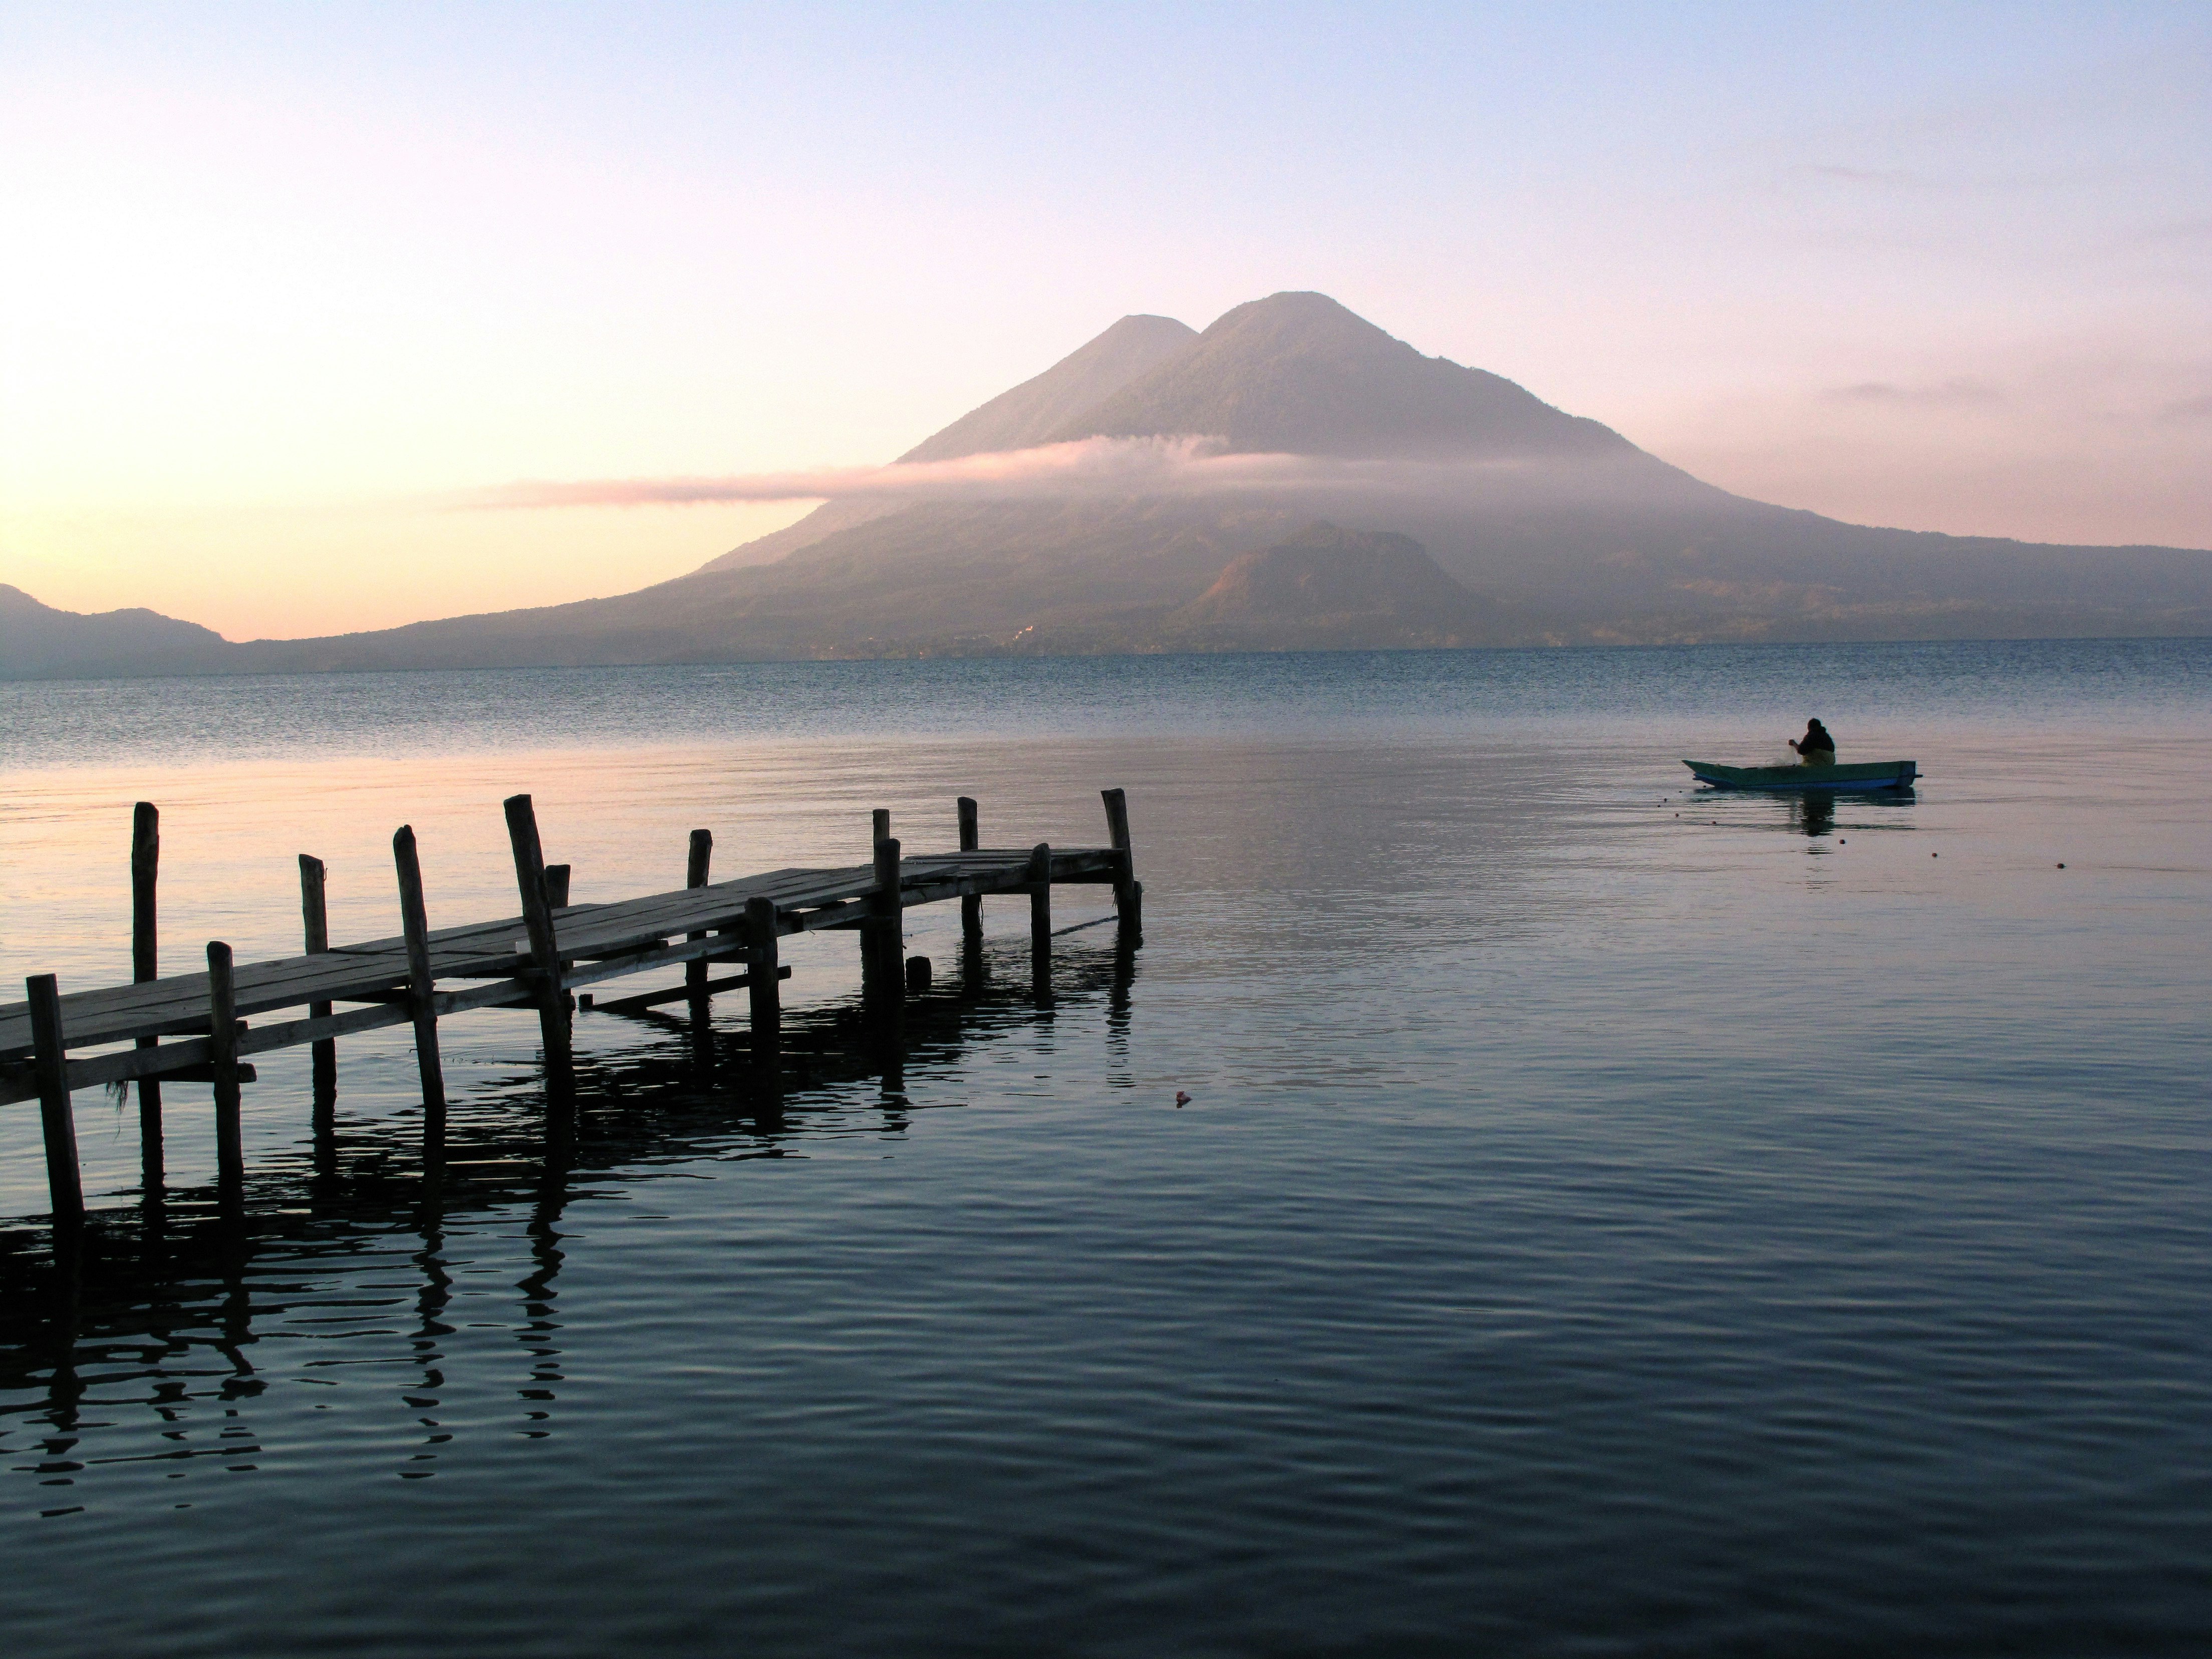 A rickety wooden harbour splinters out into the calm blue waters of Lake Atitlán. It's sunset, and a small, solitary boat glides through the water. In the background, on the opposite bank of the lake, a volcano is visible, silhouetted against the sunset.